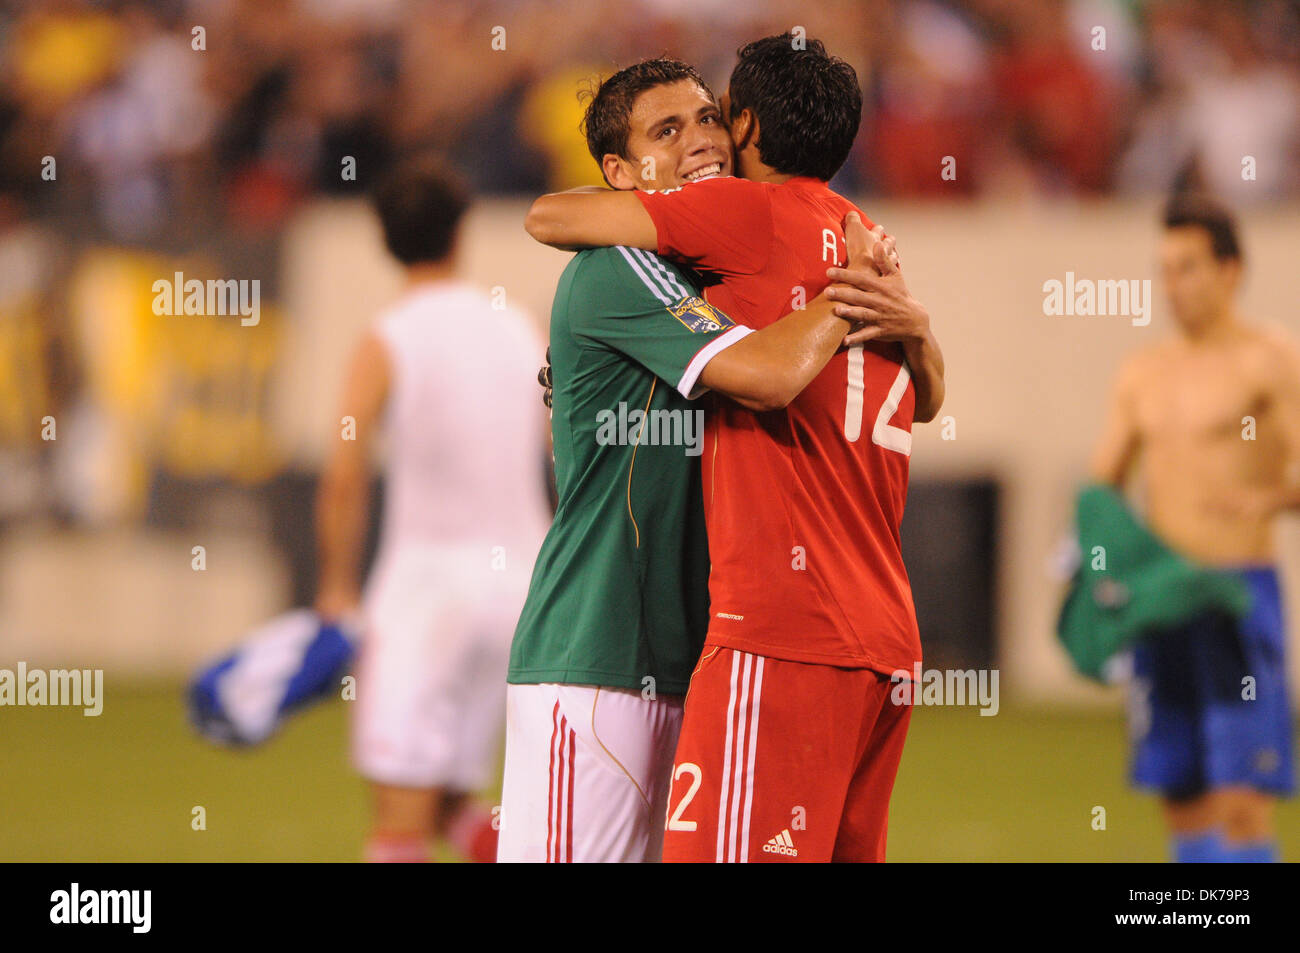 June 18, 2011 - East Rutherford, New Jersey, U.S - Mexico's goalkeeper Alfredo Talavera (12) celebrates with teammate Hector Moreno (15) during second half CONCACAF Gold Cup soccer quarterfinal action where Mexico defeated Guatemala 2-1 at the New Meadowlands Stadium in East Rutherford, N.J. (Credit Image: © Will Schneekloth/Southcreek Global/ZUMAPRESS.com) Stock Photo